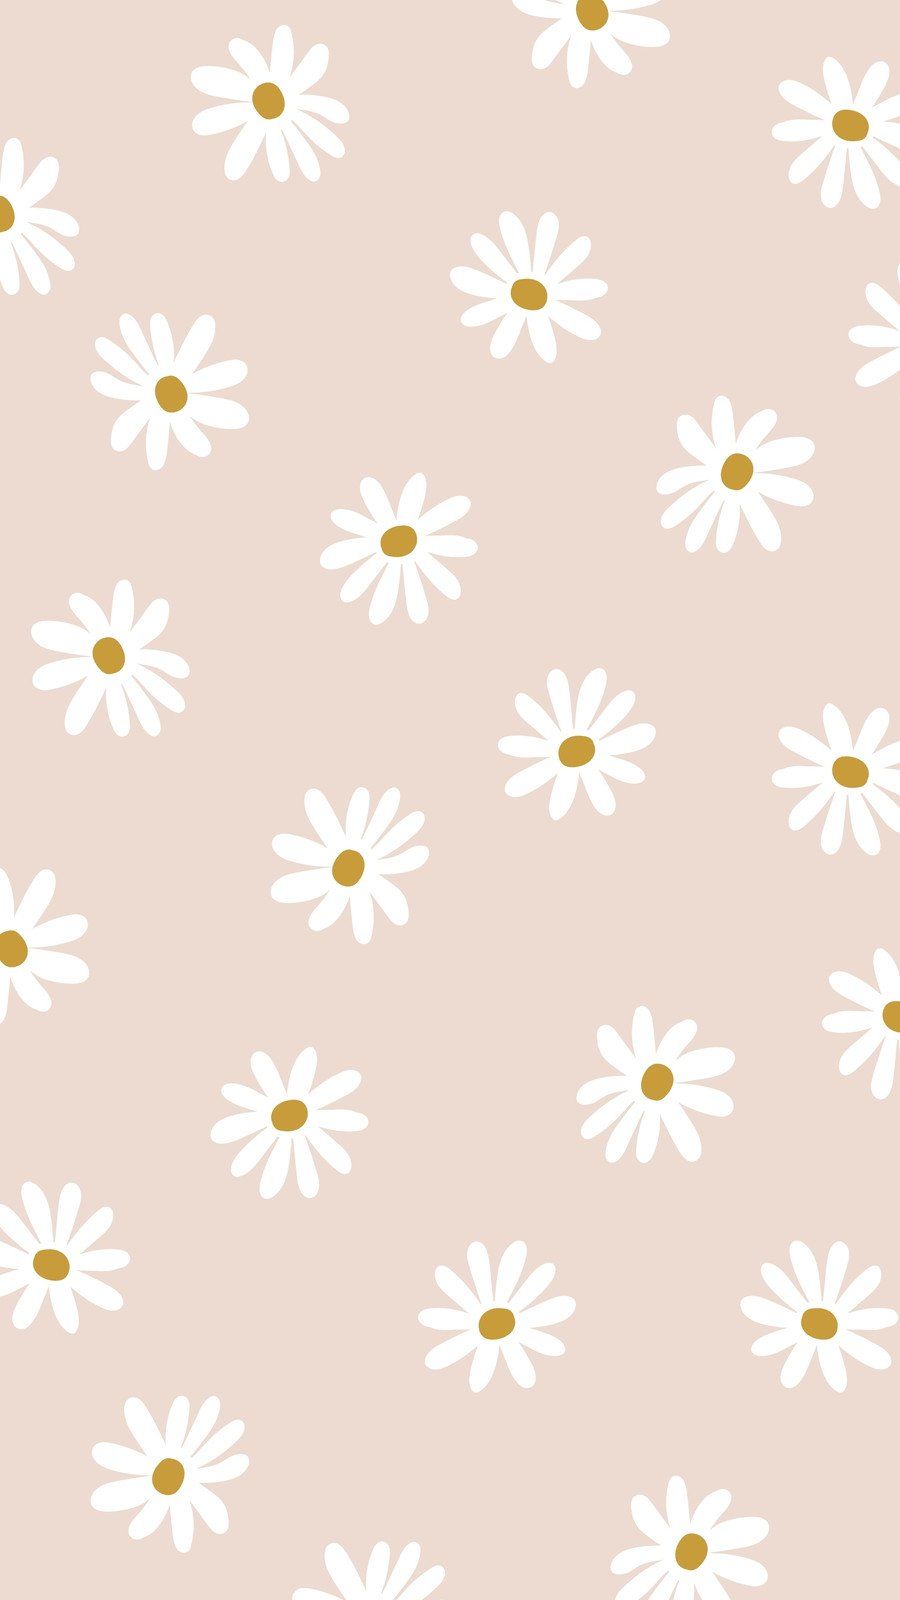 IPhone wallpaper daisies, spring, flowers, phone background, phone wallpaper, wallpaper, aesthetic, cute, floral, girly, illustration, pattern, phone background, phone wallpaper, wallpaper, aesthetic, cute, floral, girly, illustration, pattern - Yellow, daisy, pink phone, pattern, March, April